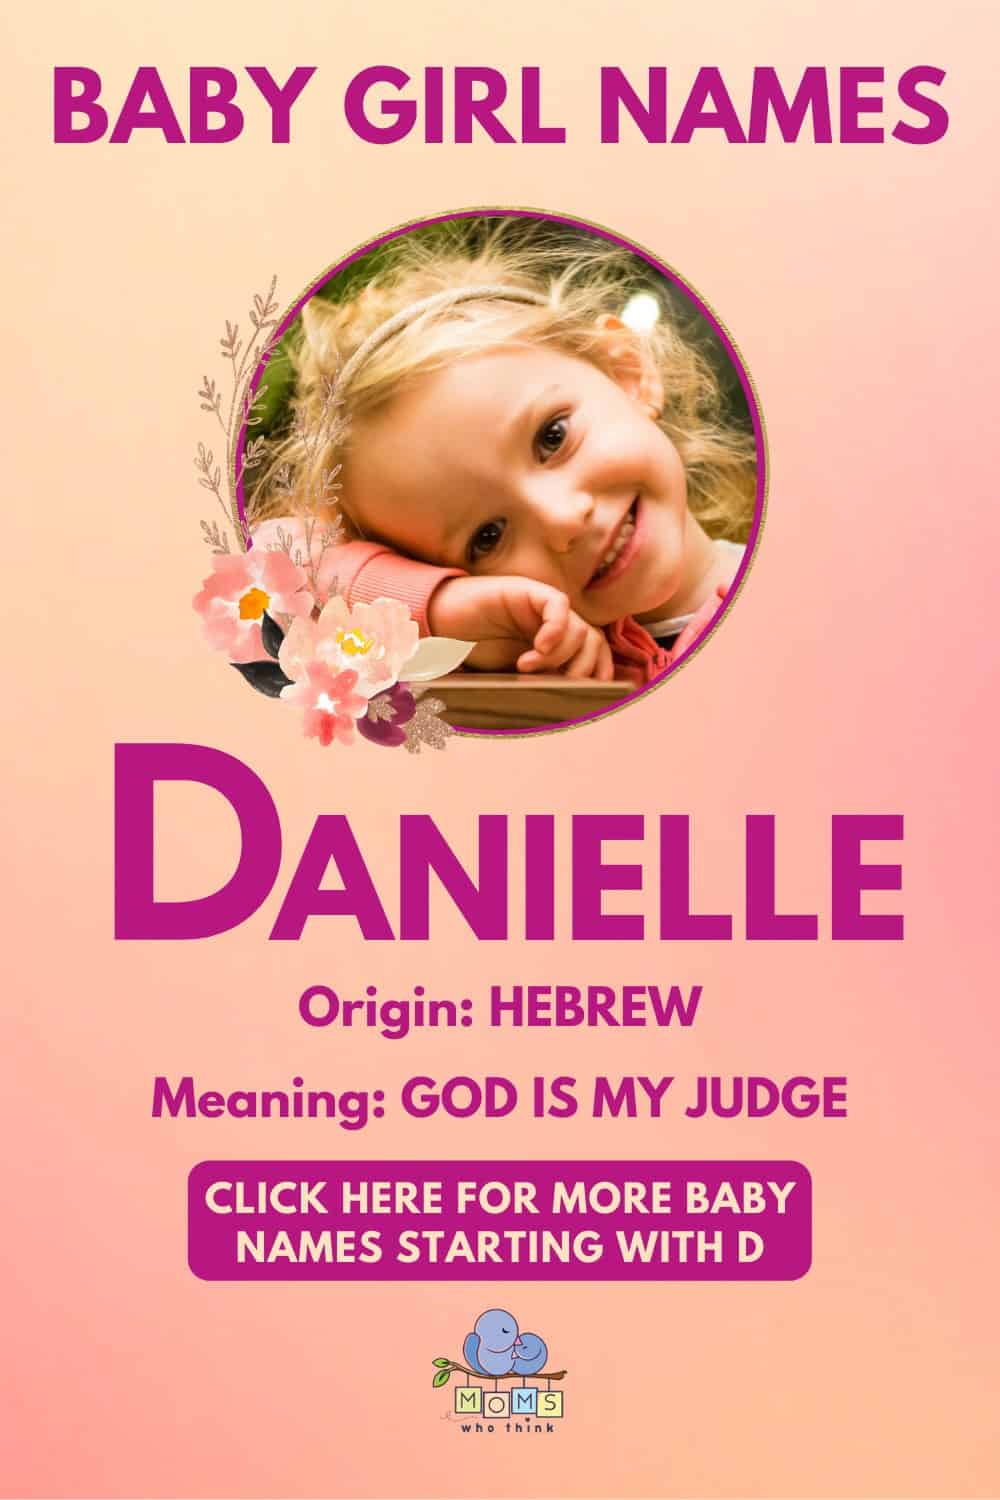 Baby girl name meanings - Danielle